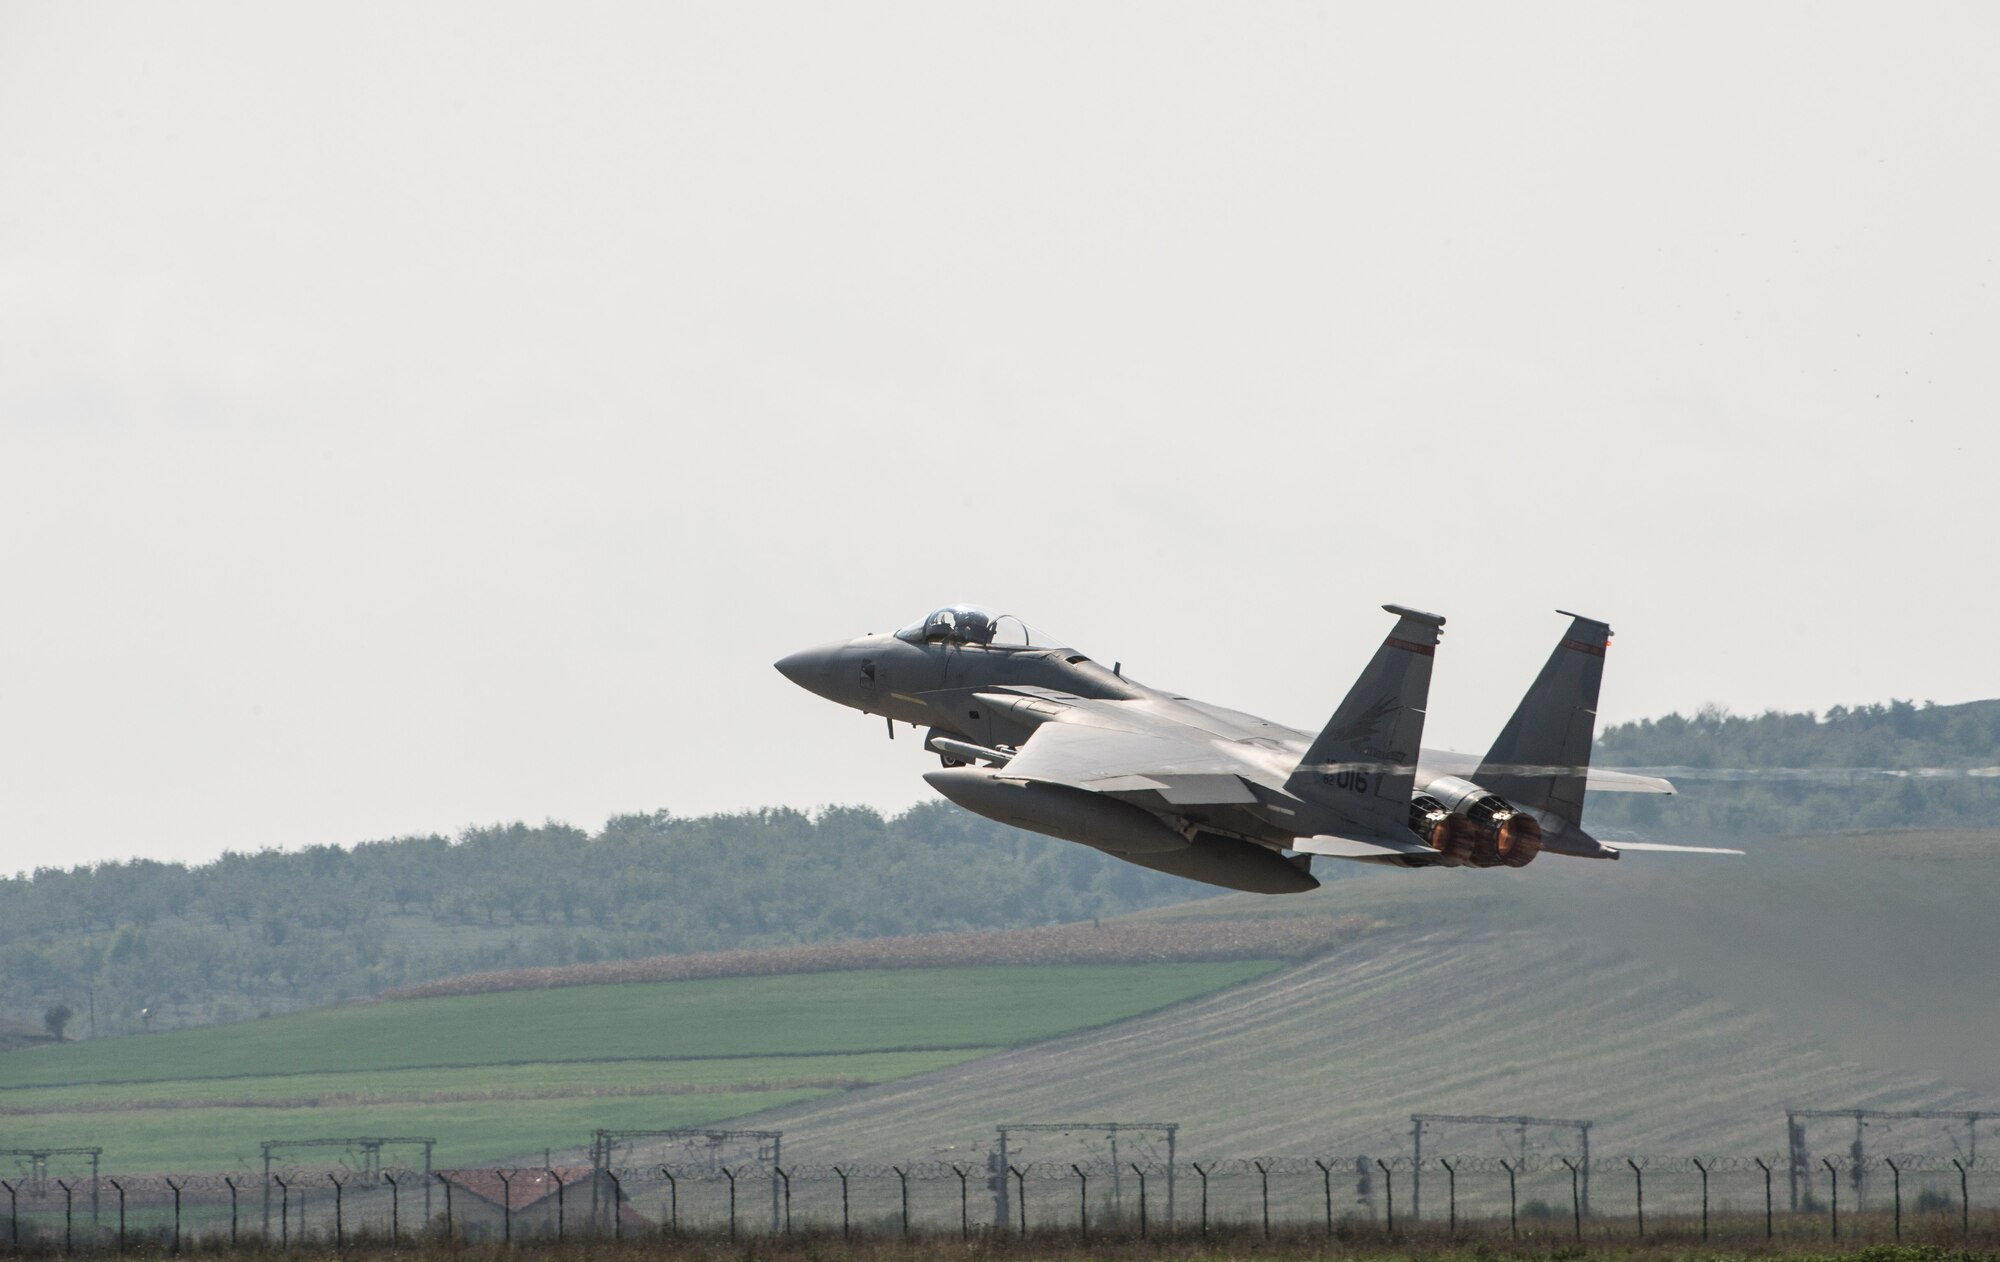 An F-15C Eagle fighter aircraft pilot assigned to the 123rd Expeditionary Fighter Squadron, 142nd Fighter Wing, Oregon Air National Guard, takes off during a theater security package deployment Sept. 25, 2015, at Campia Turzii, Romania. The pilots conducted training alongside NATO allies to strengthen interoperability and demonstrate U.S. commitment to the security and stability of Europe. (U.S. Air Force photo by Staff Sgt. Christopher Ruano/Released)